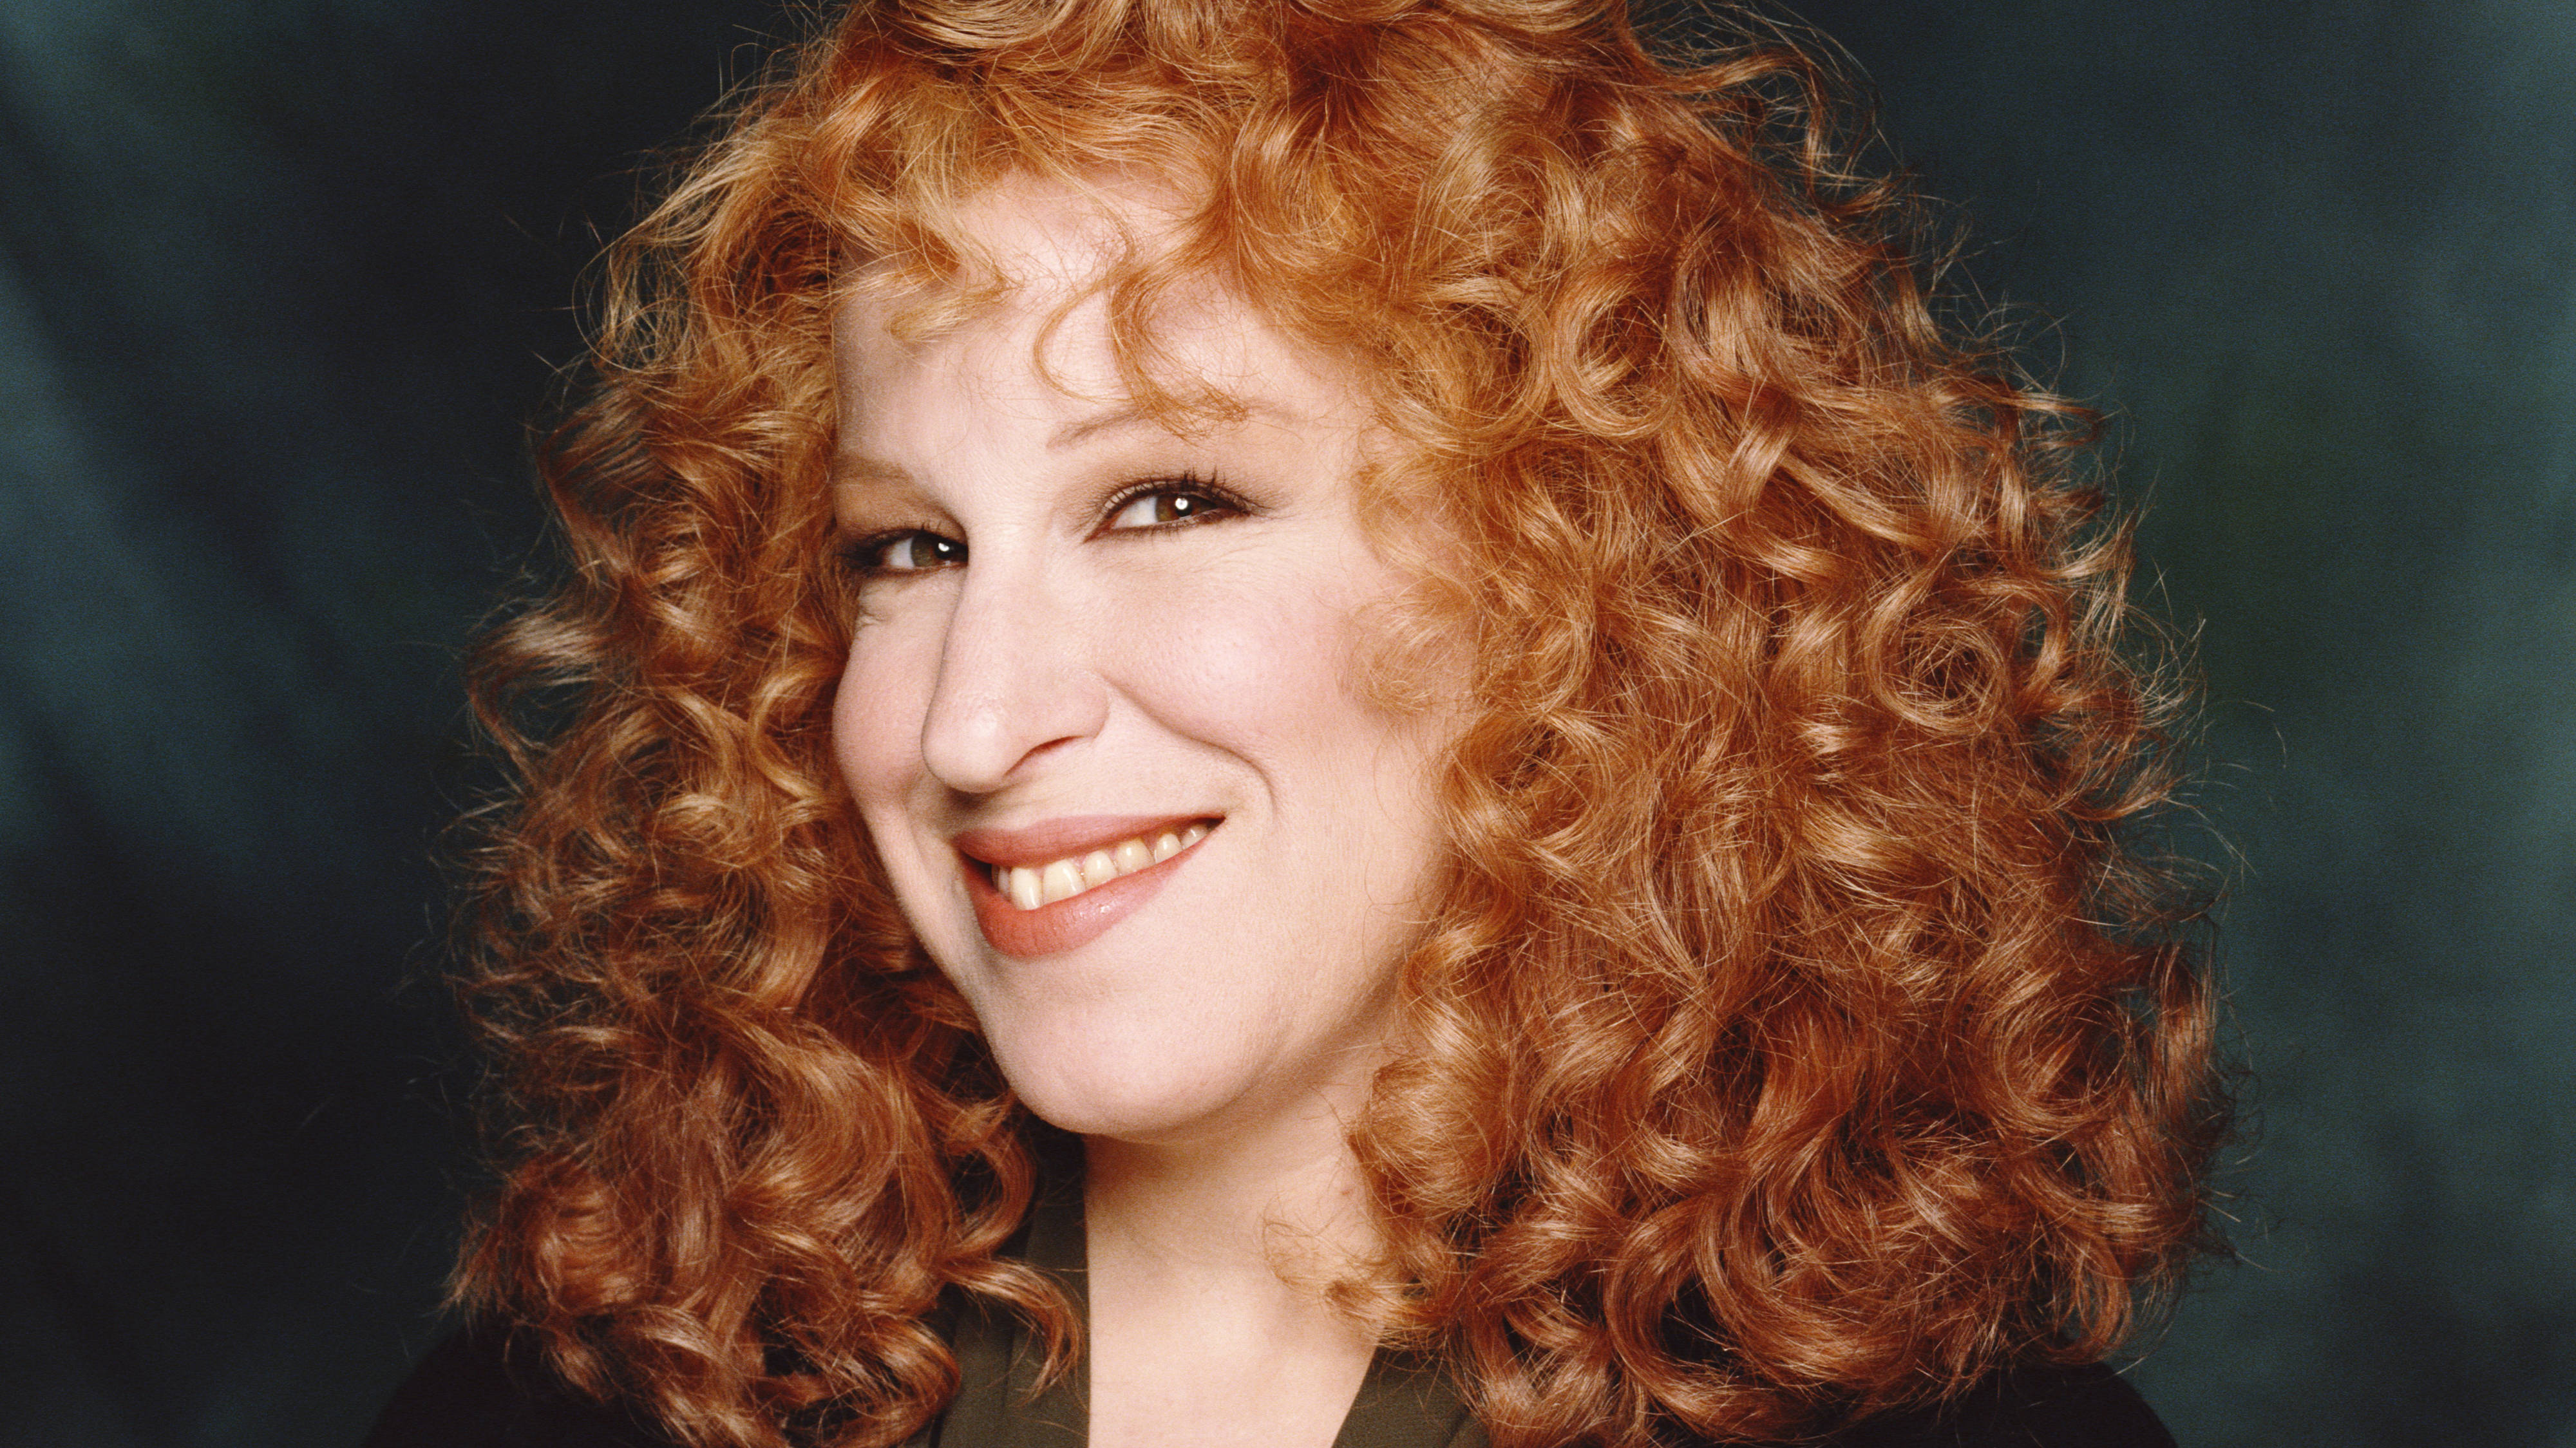 Bette Midler's 10 greatest songs ever, ranked - Smooth